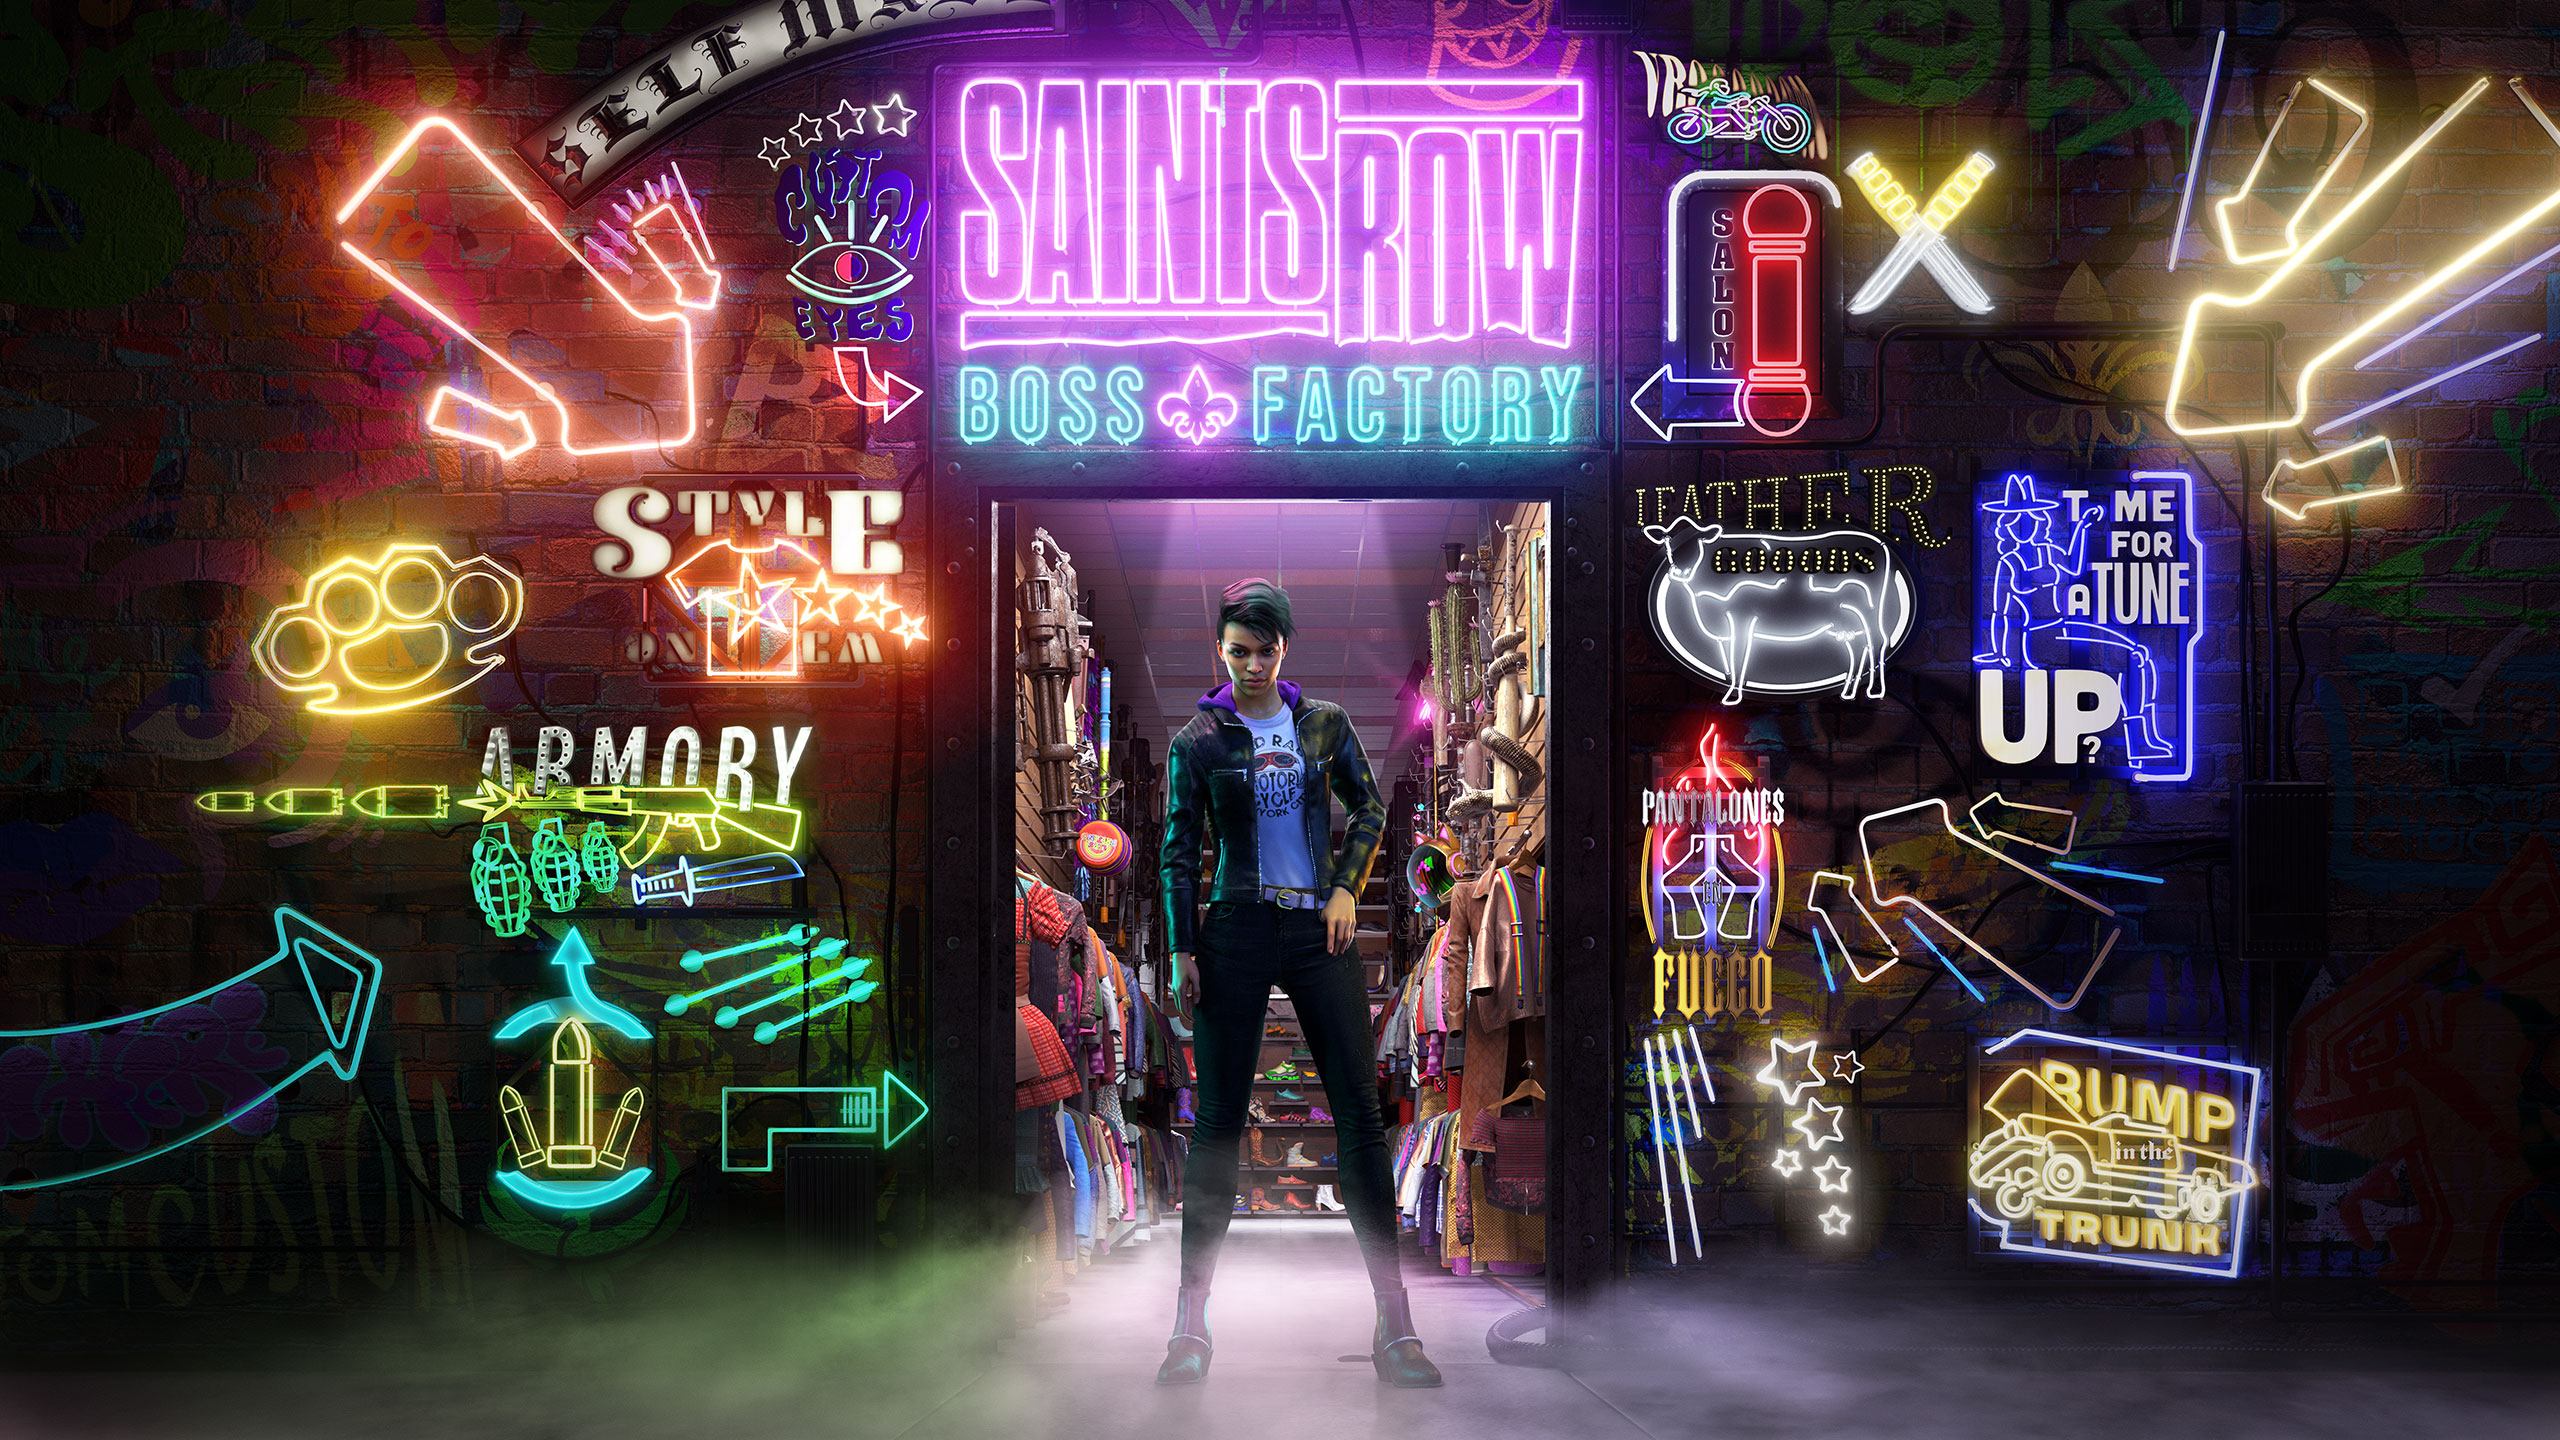 Saints Row reboot starts the series from scratch - CNET